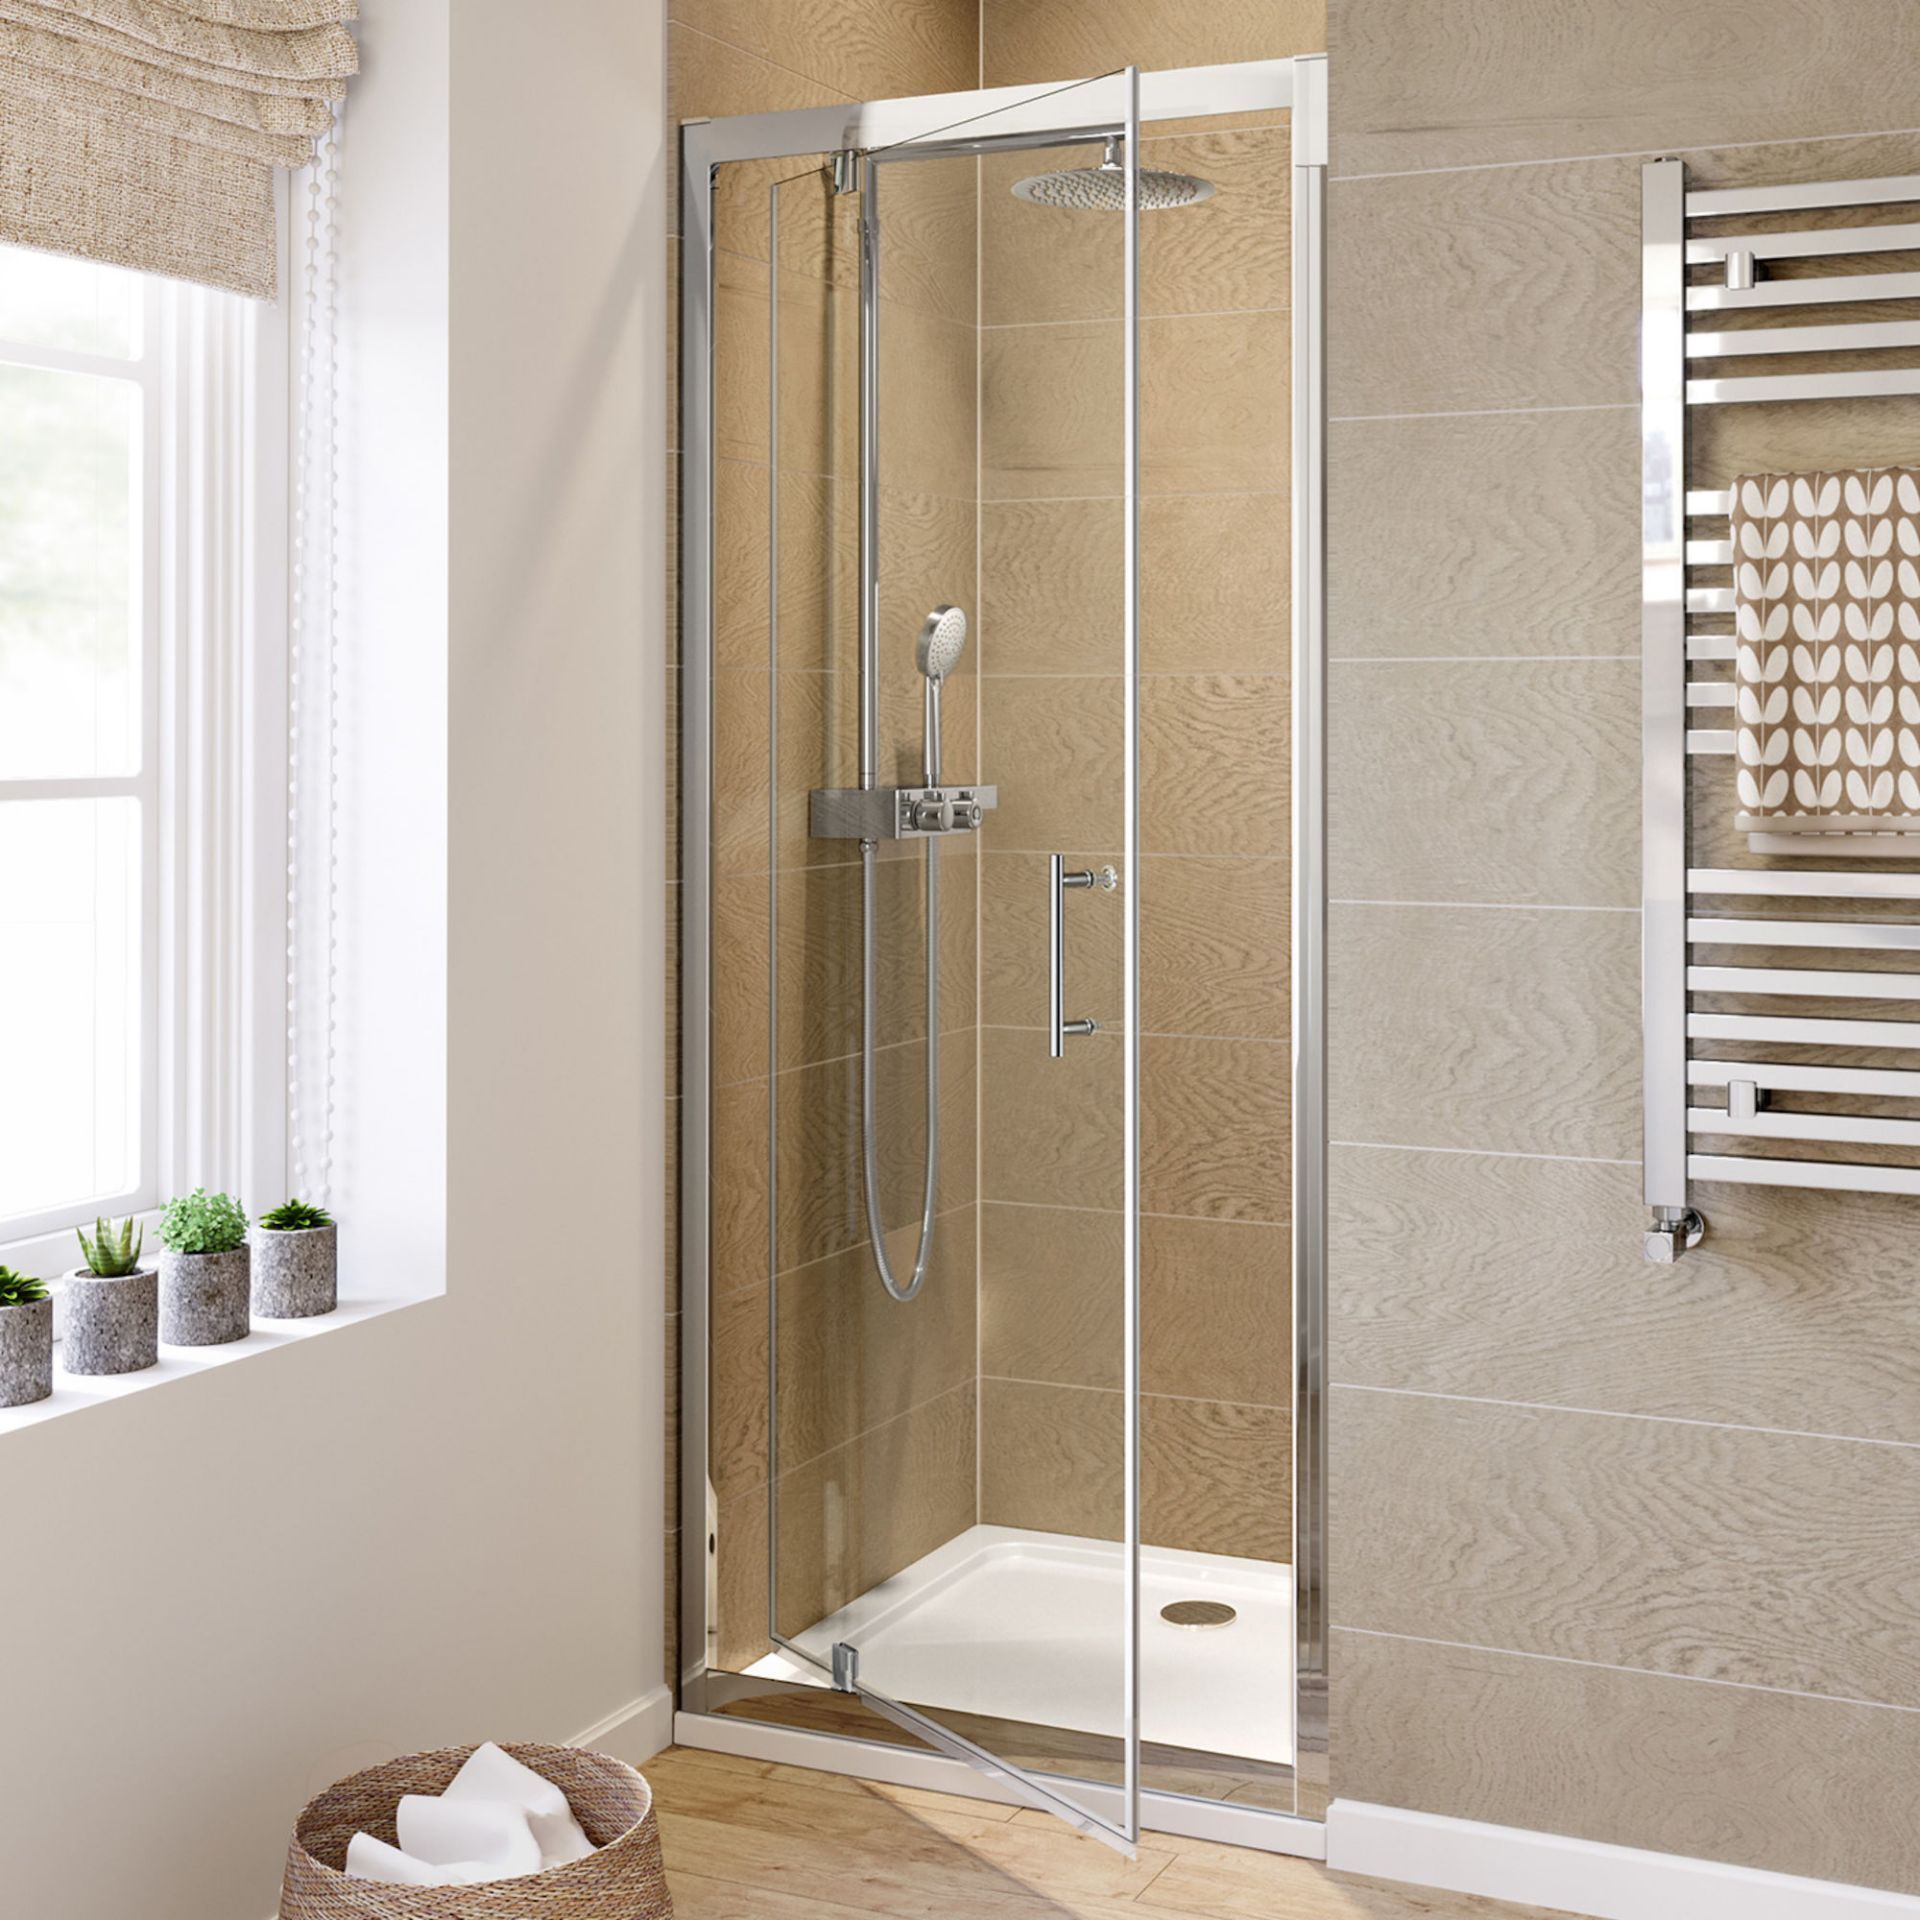 New 700mm - 6mm - Premium Pivot Shower Door RRP £299.99.8mm Safety Glass Fully Waterproof Test...